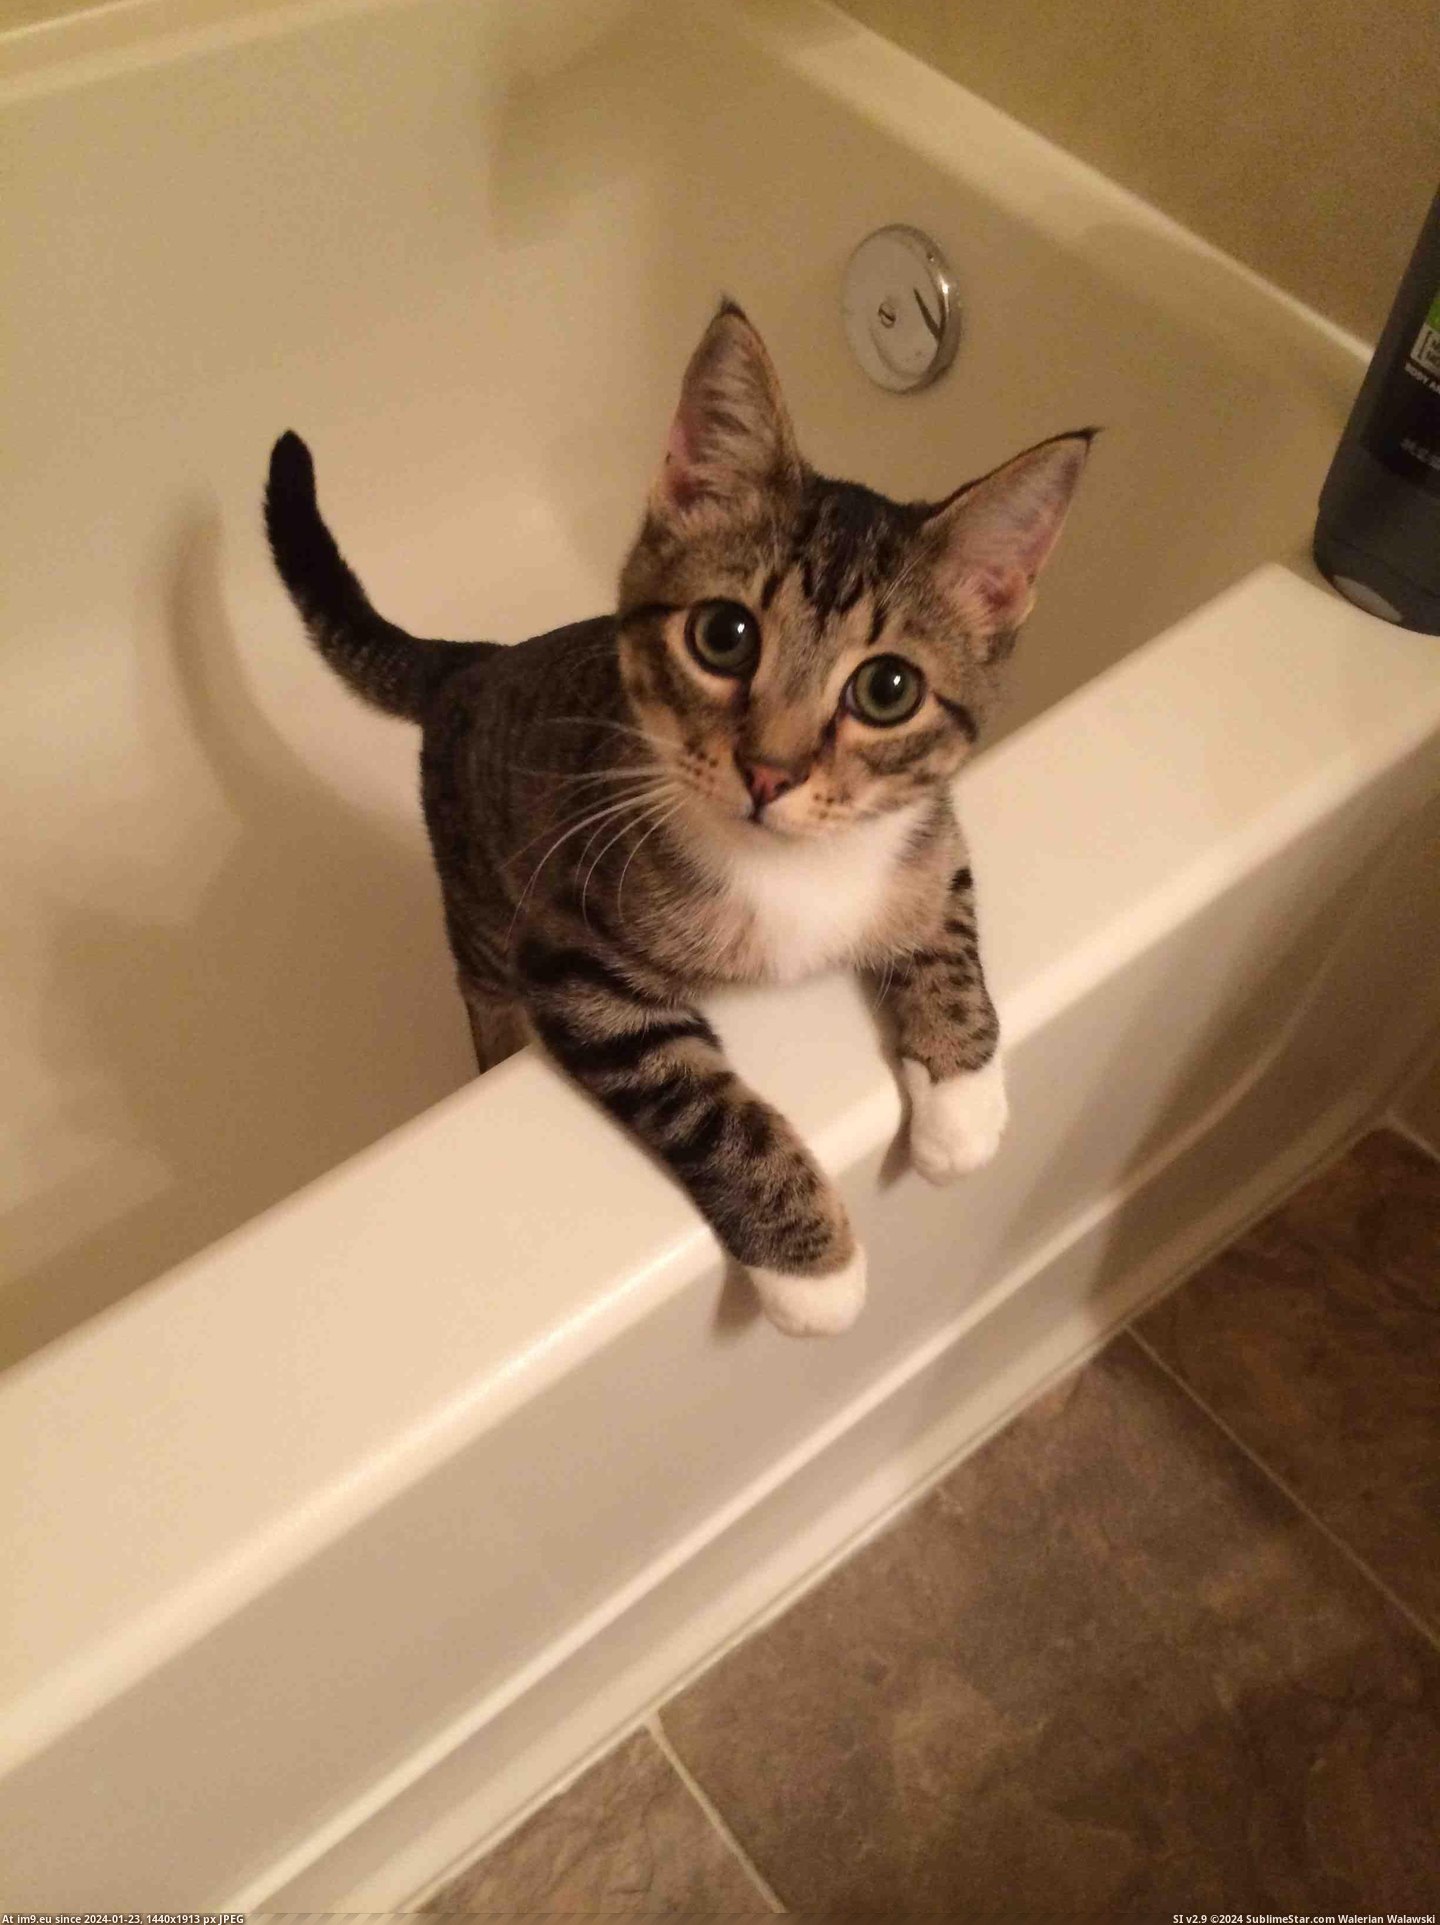 #Shower #Meet #Lou #Tub #Jumps [Aww] He always jumps into the tub after a shower. Reddit, meet Lou. Pic. (Obraz z album My r/AWW favs))